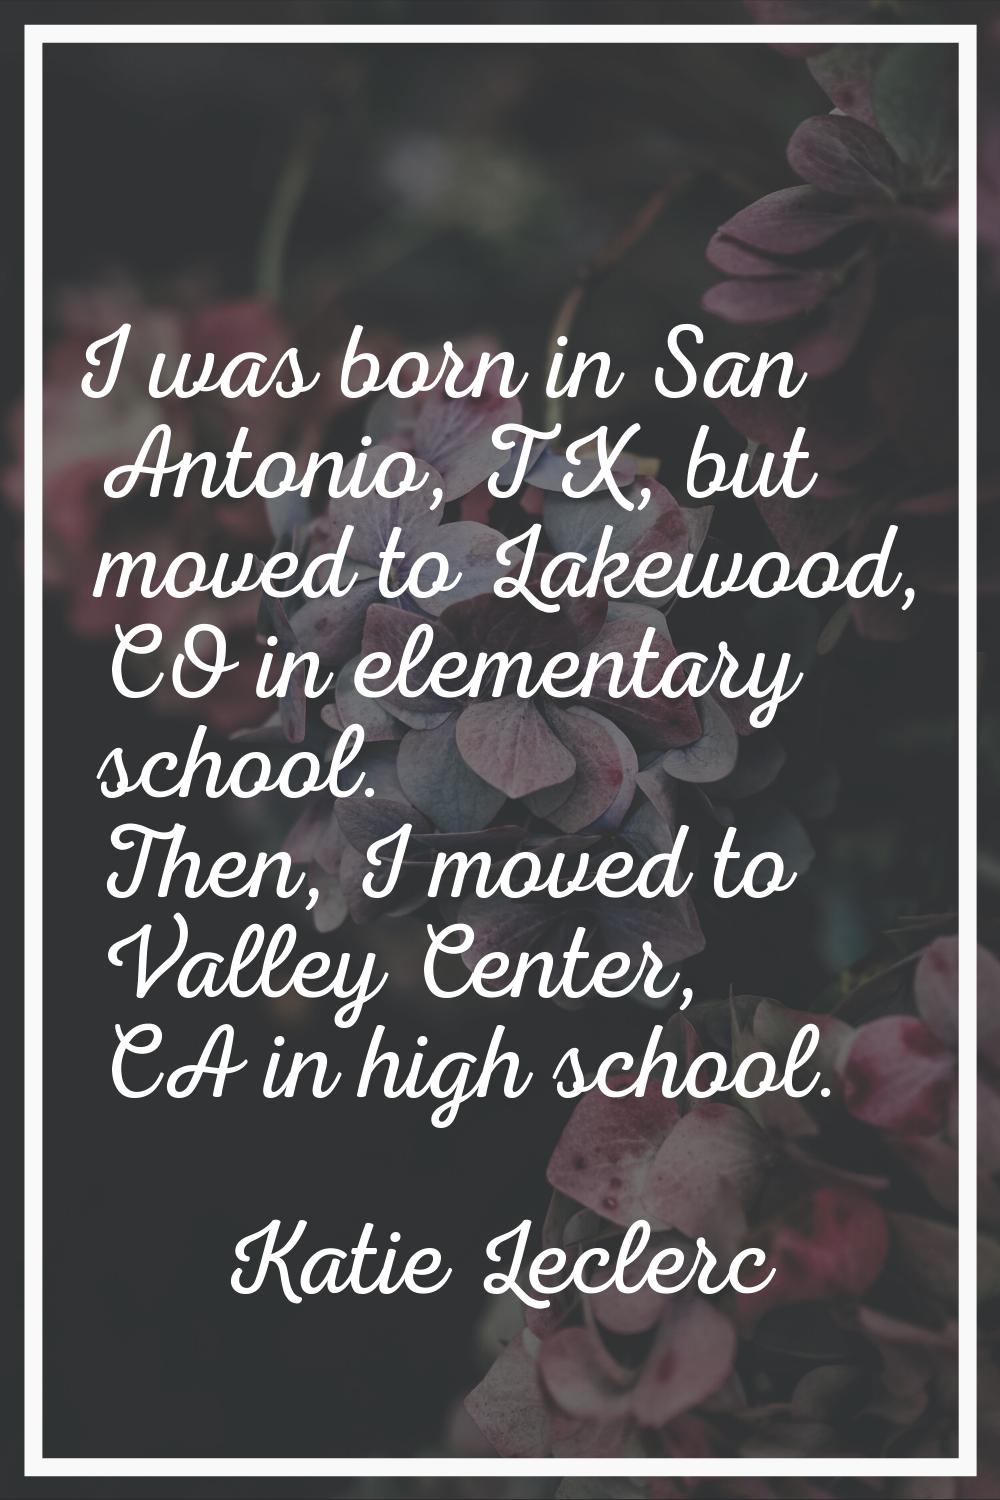 I was born in San Antonio, TX, but moved to Lakewood, CO in elementary school. Then, I moved to Val